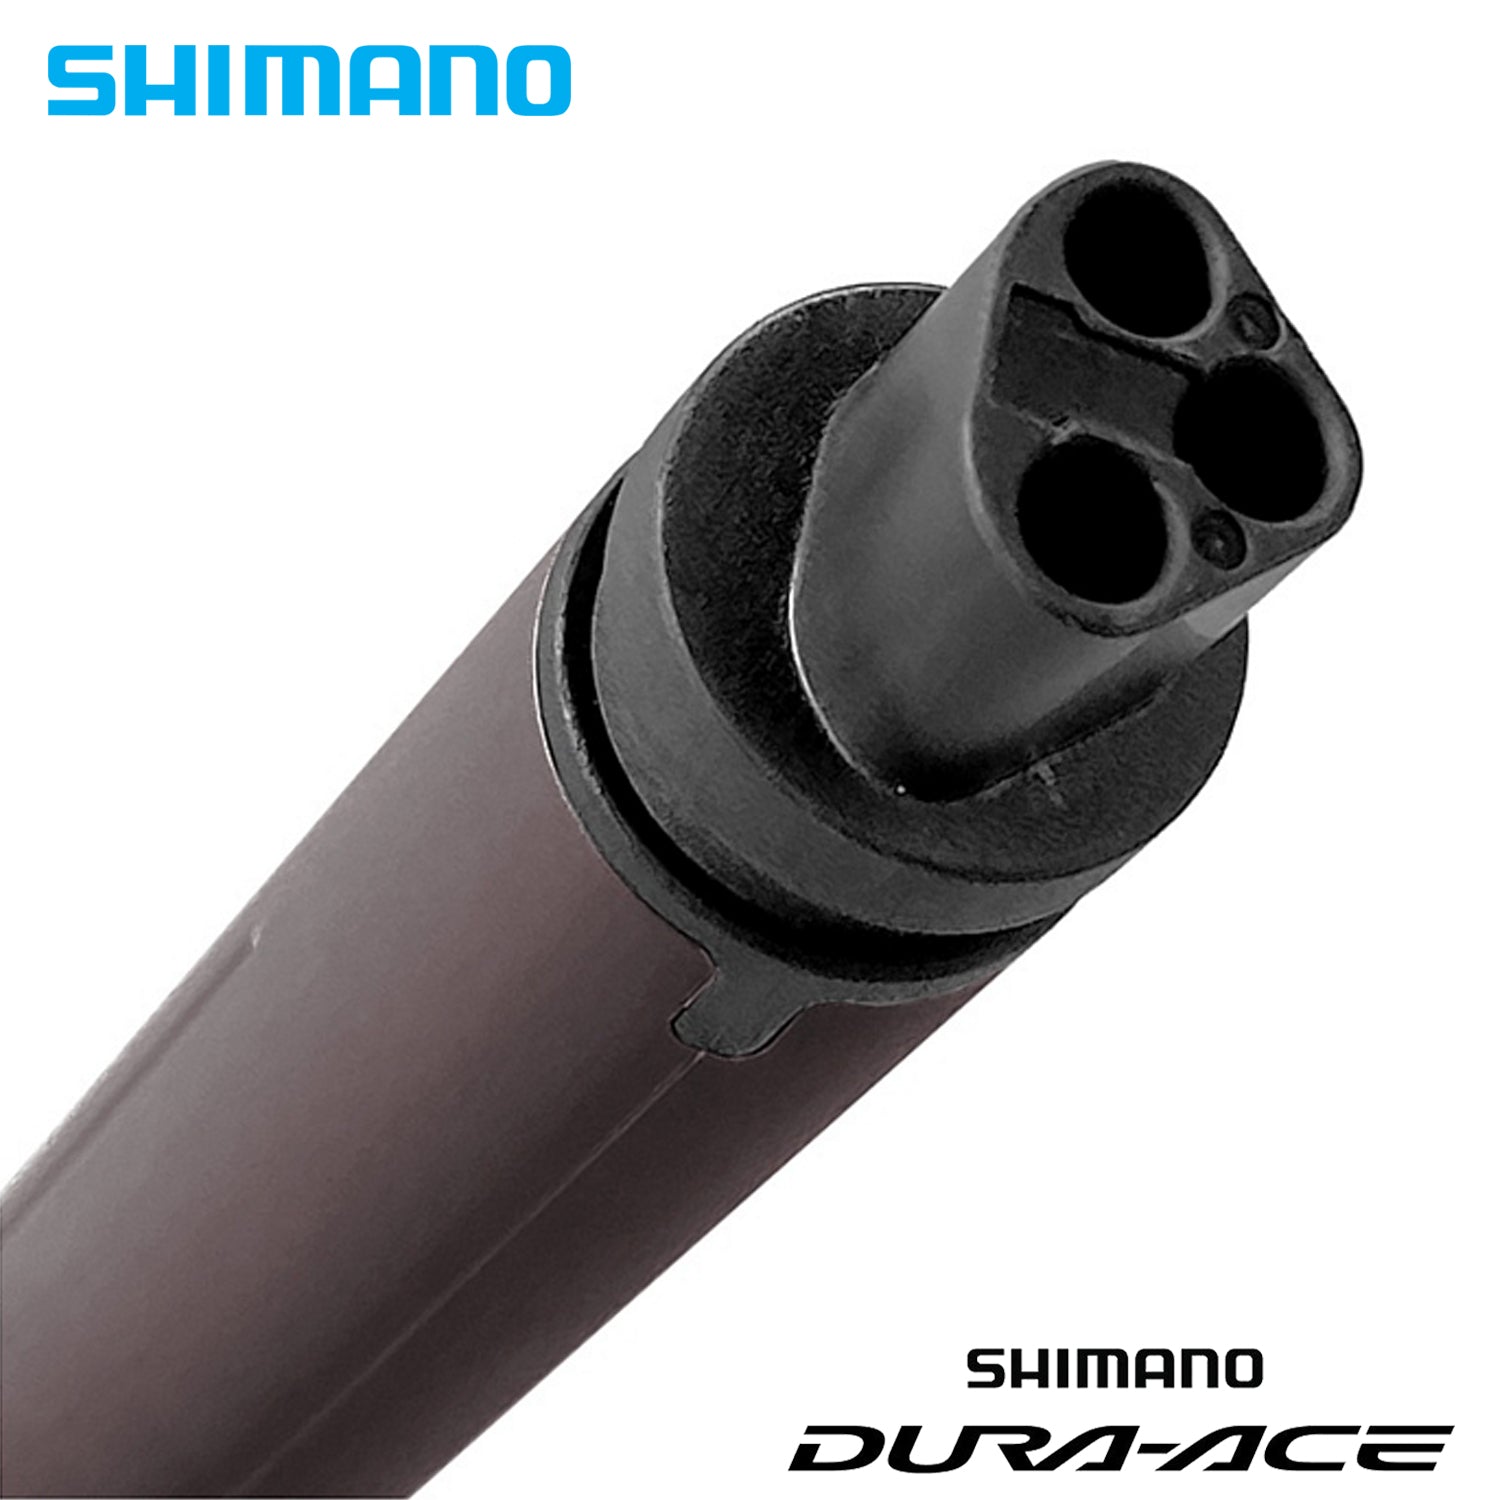 Shimano BT-DN300 Built-In Type Di2 Battery [SD300 Type]